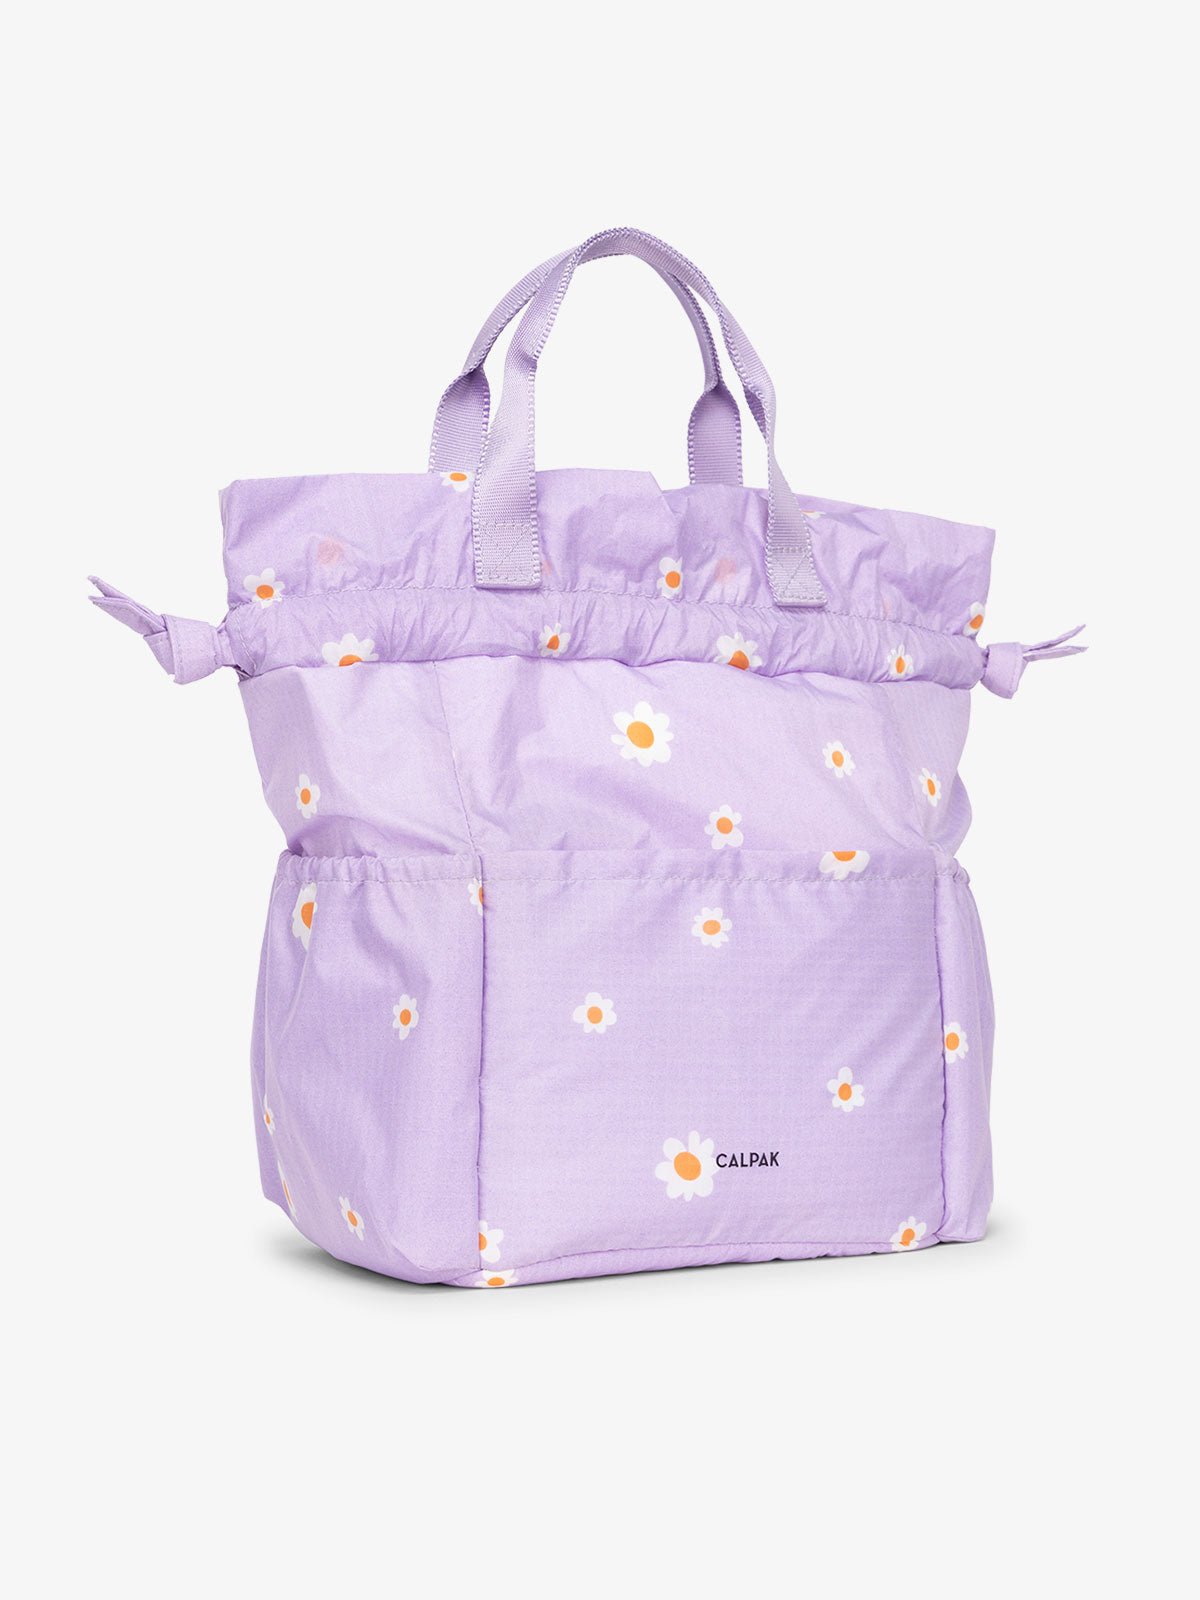 CALPAK Insulated Lunch Bag for men with multiple pockets and drawstring closure in light purple floral print